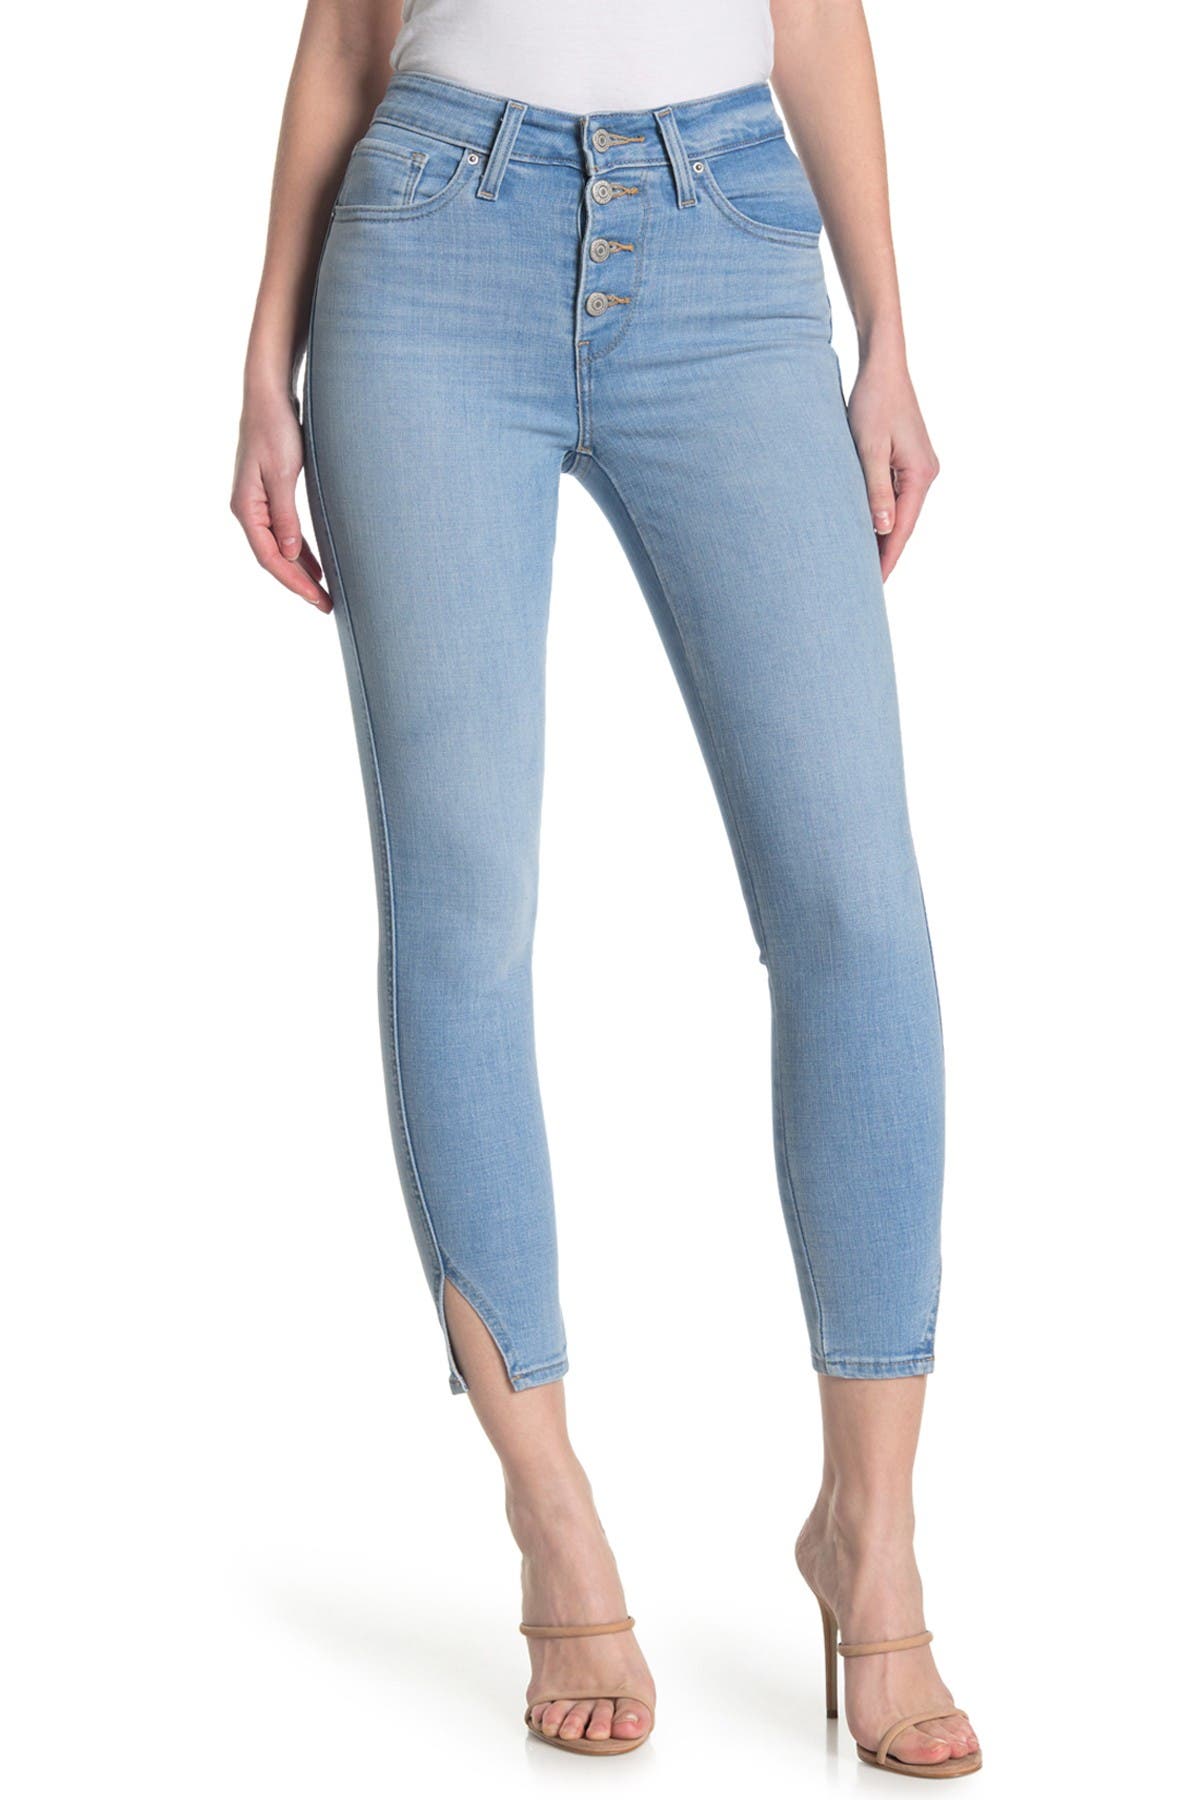 levi's skinny cropped jeans